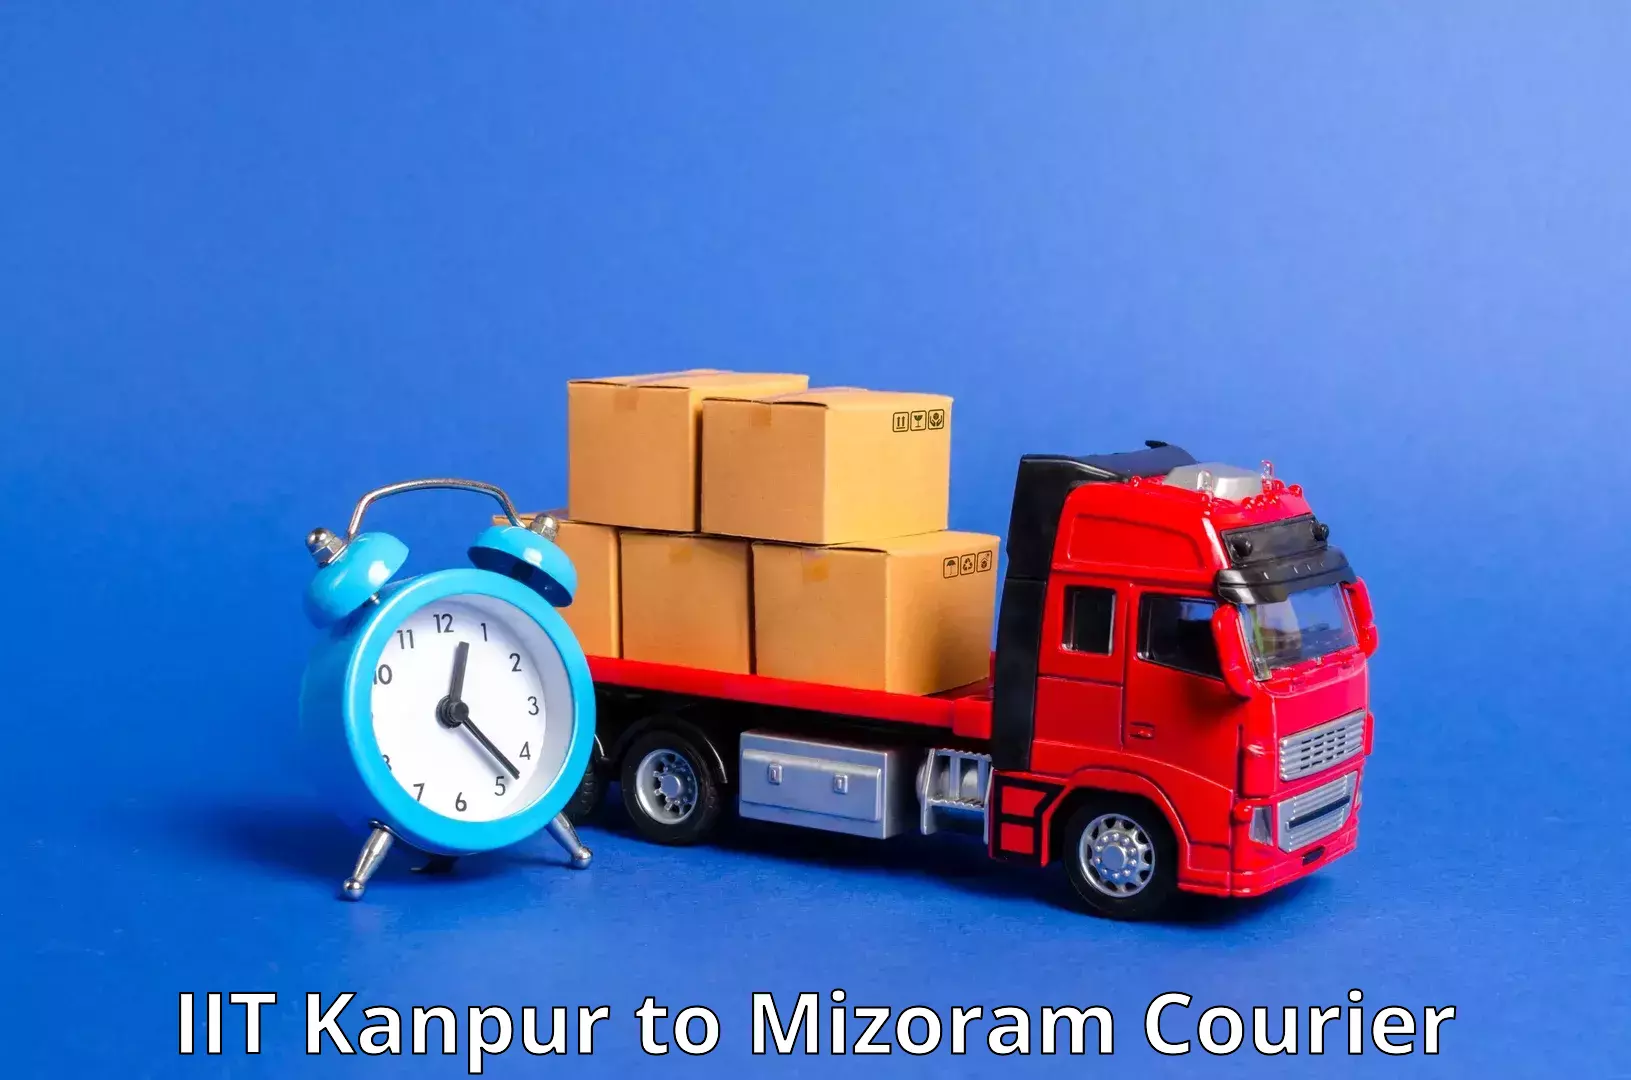 Next day courier IIT Kanpur to Aizawl